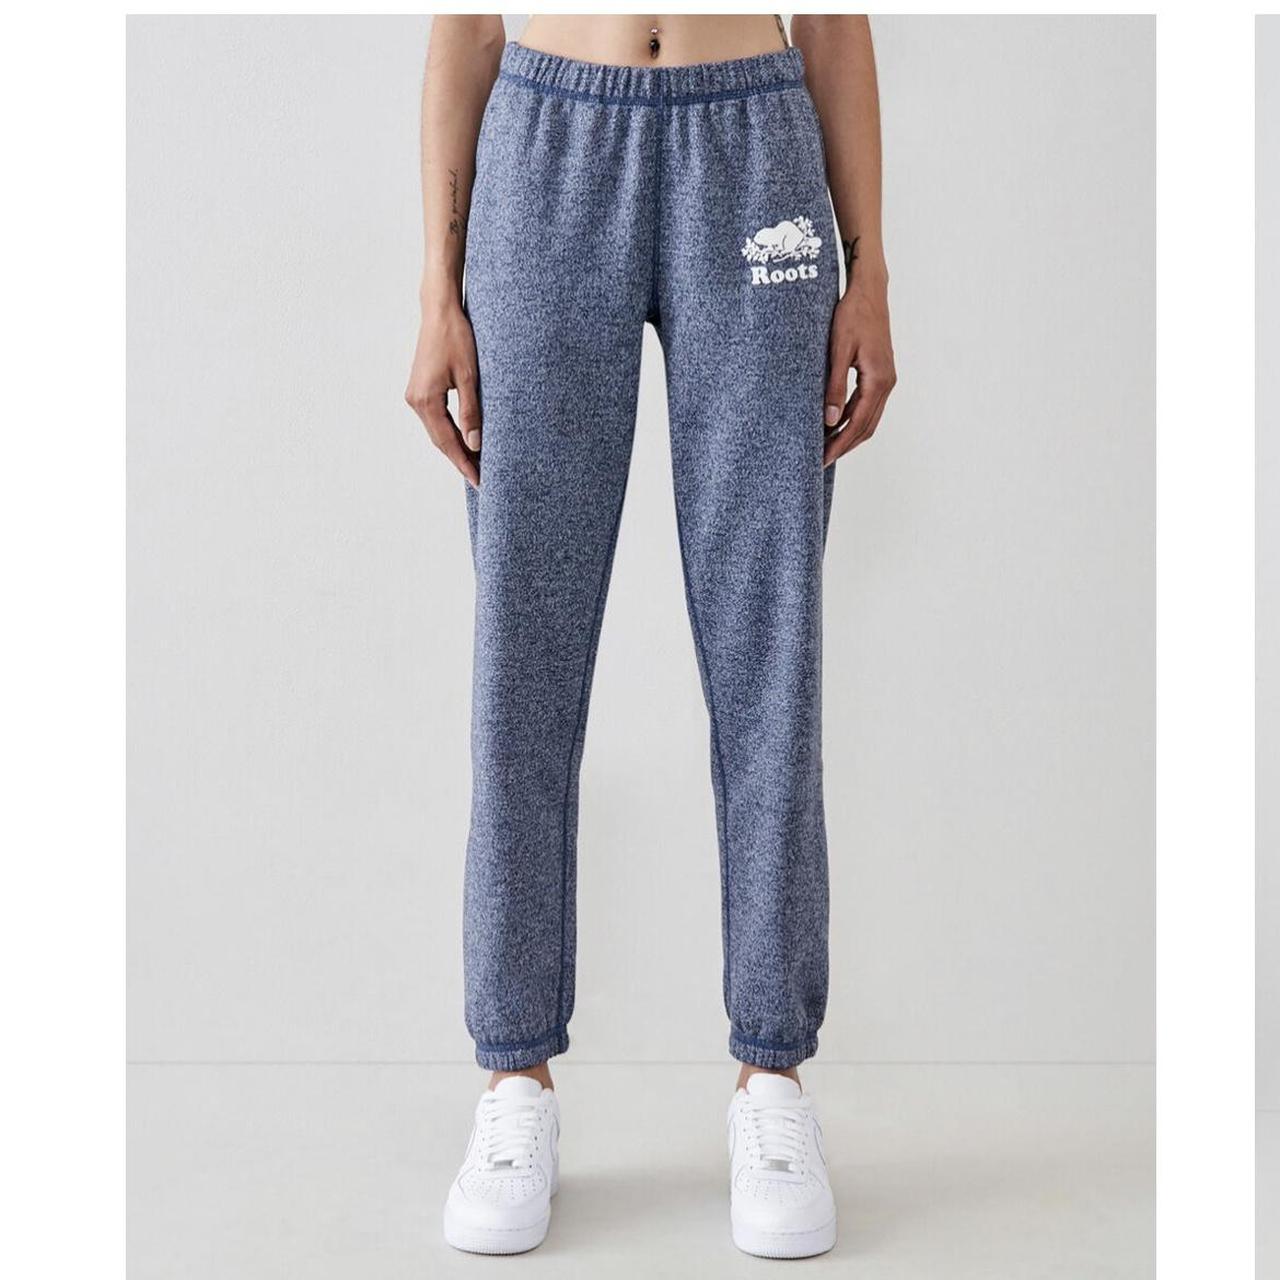 Roots just launched limited edition sweats for International Sweatpants Day